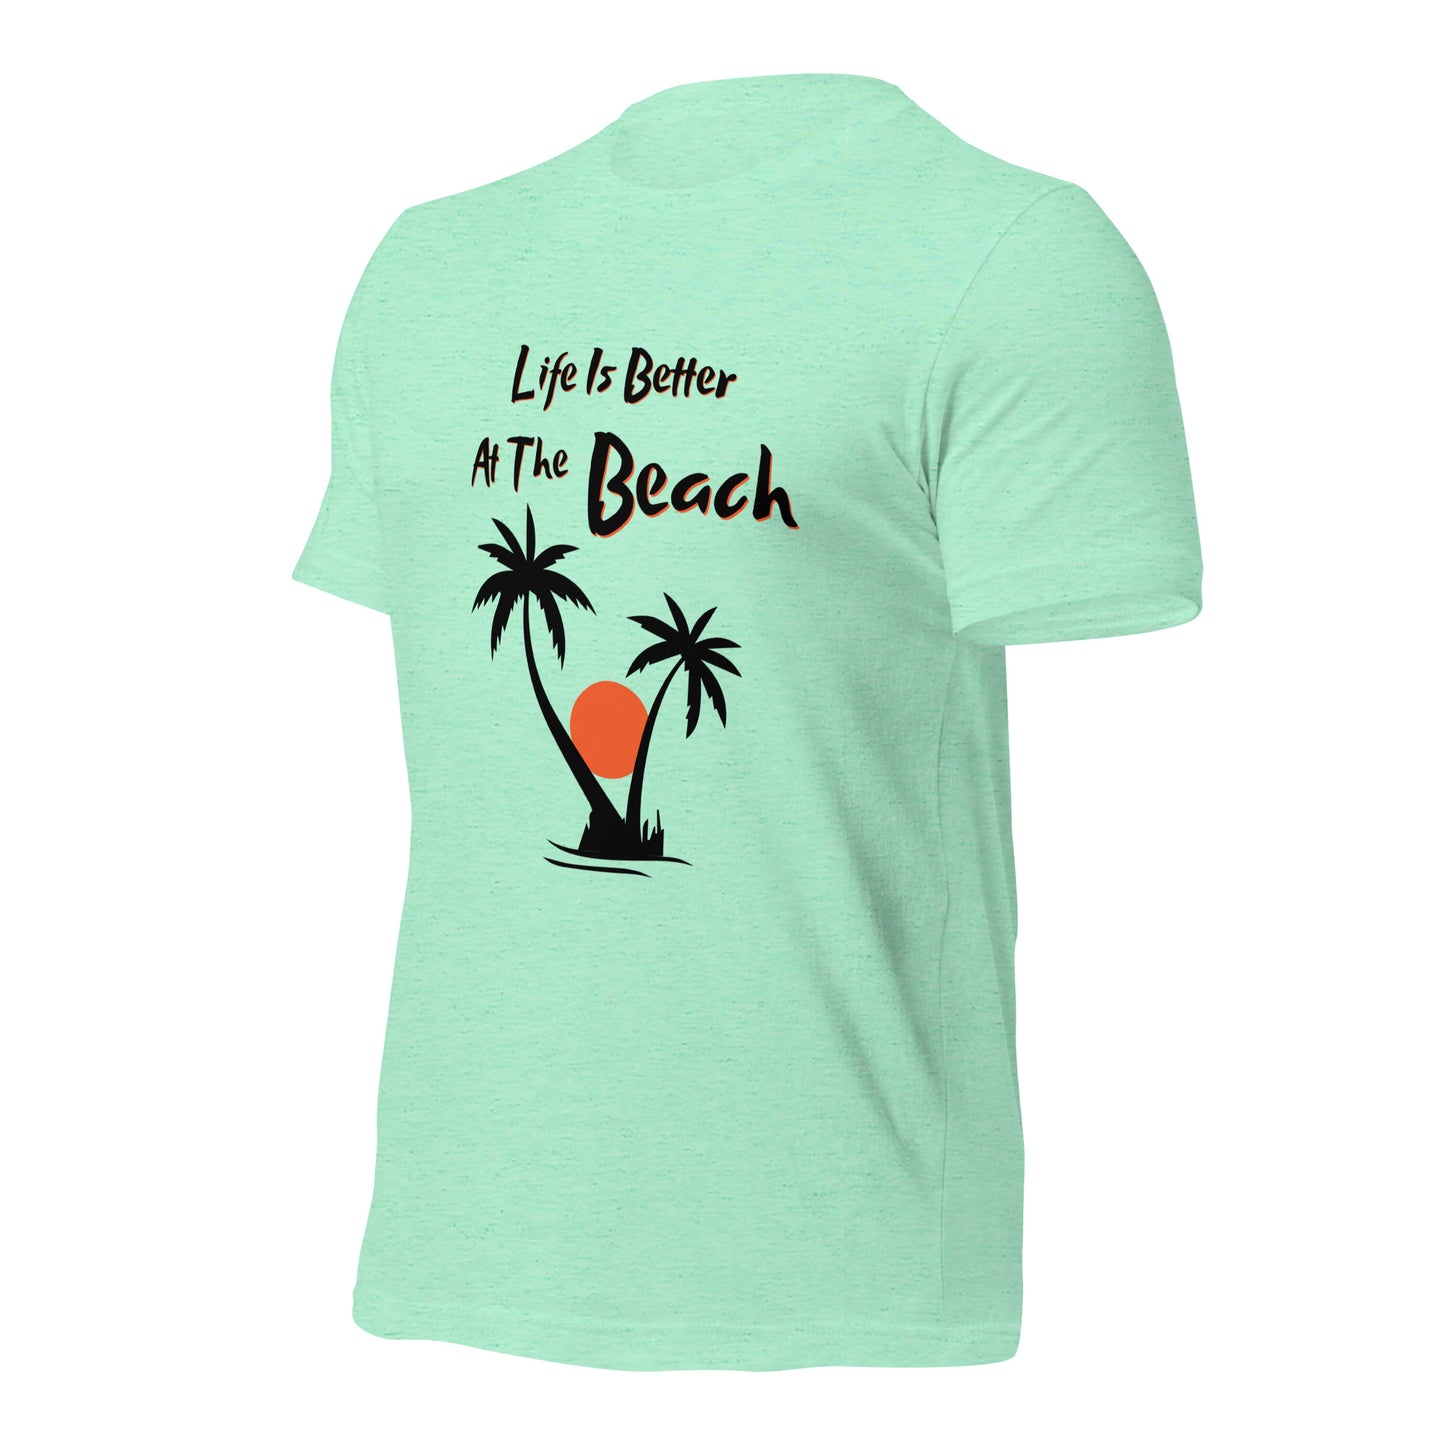 “Life Is Better At The Beach” T-Shirt - Weave Got Gifts - Unique Gifts You Won’t Find Anywhere Else!